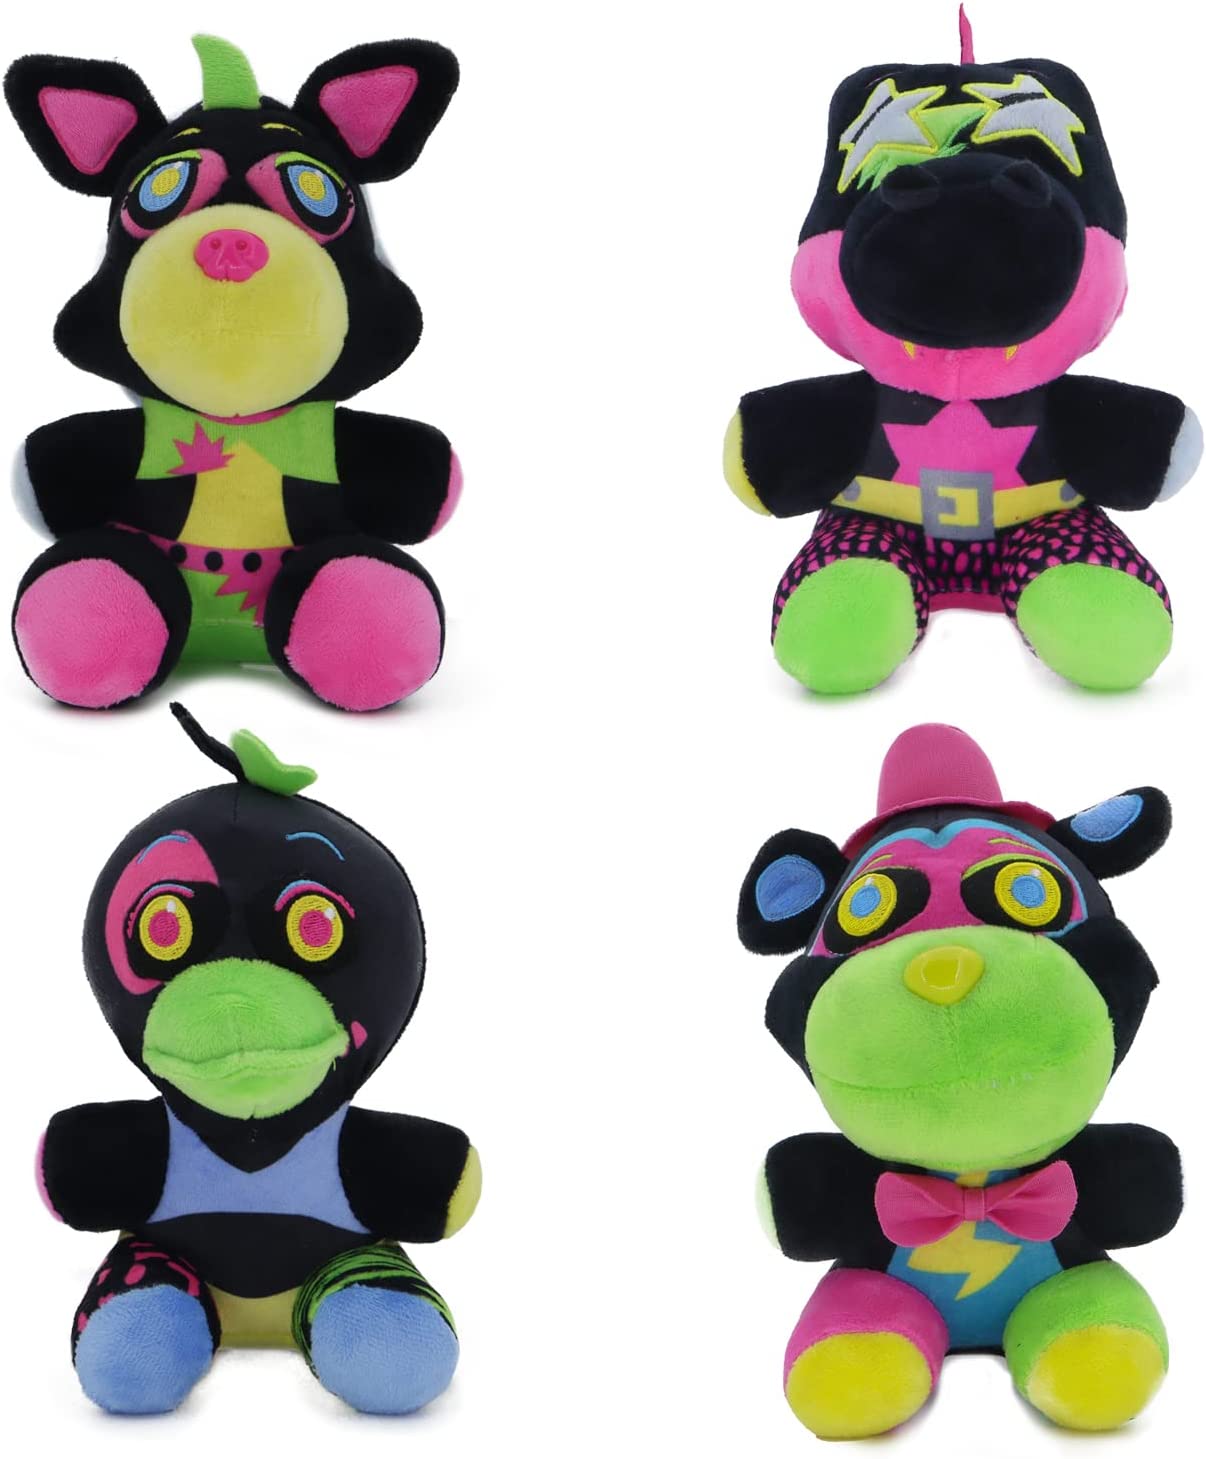 Five Nights at Freddy FNAF Security Breach Plush Set of 4 Toys 7-8 inches  New